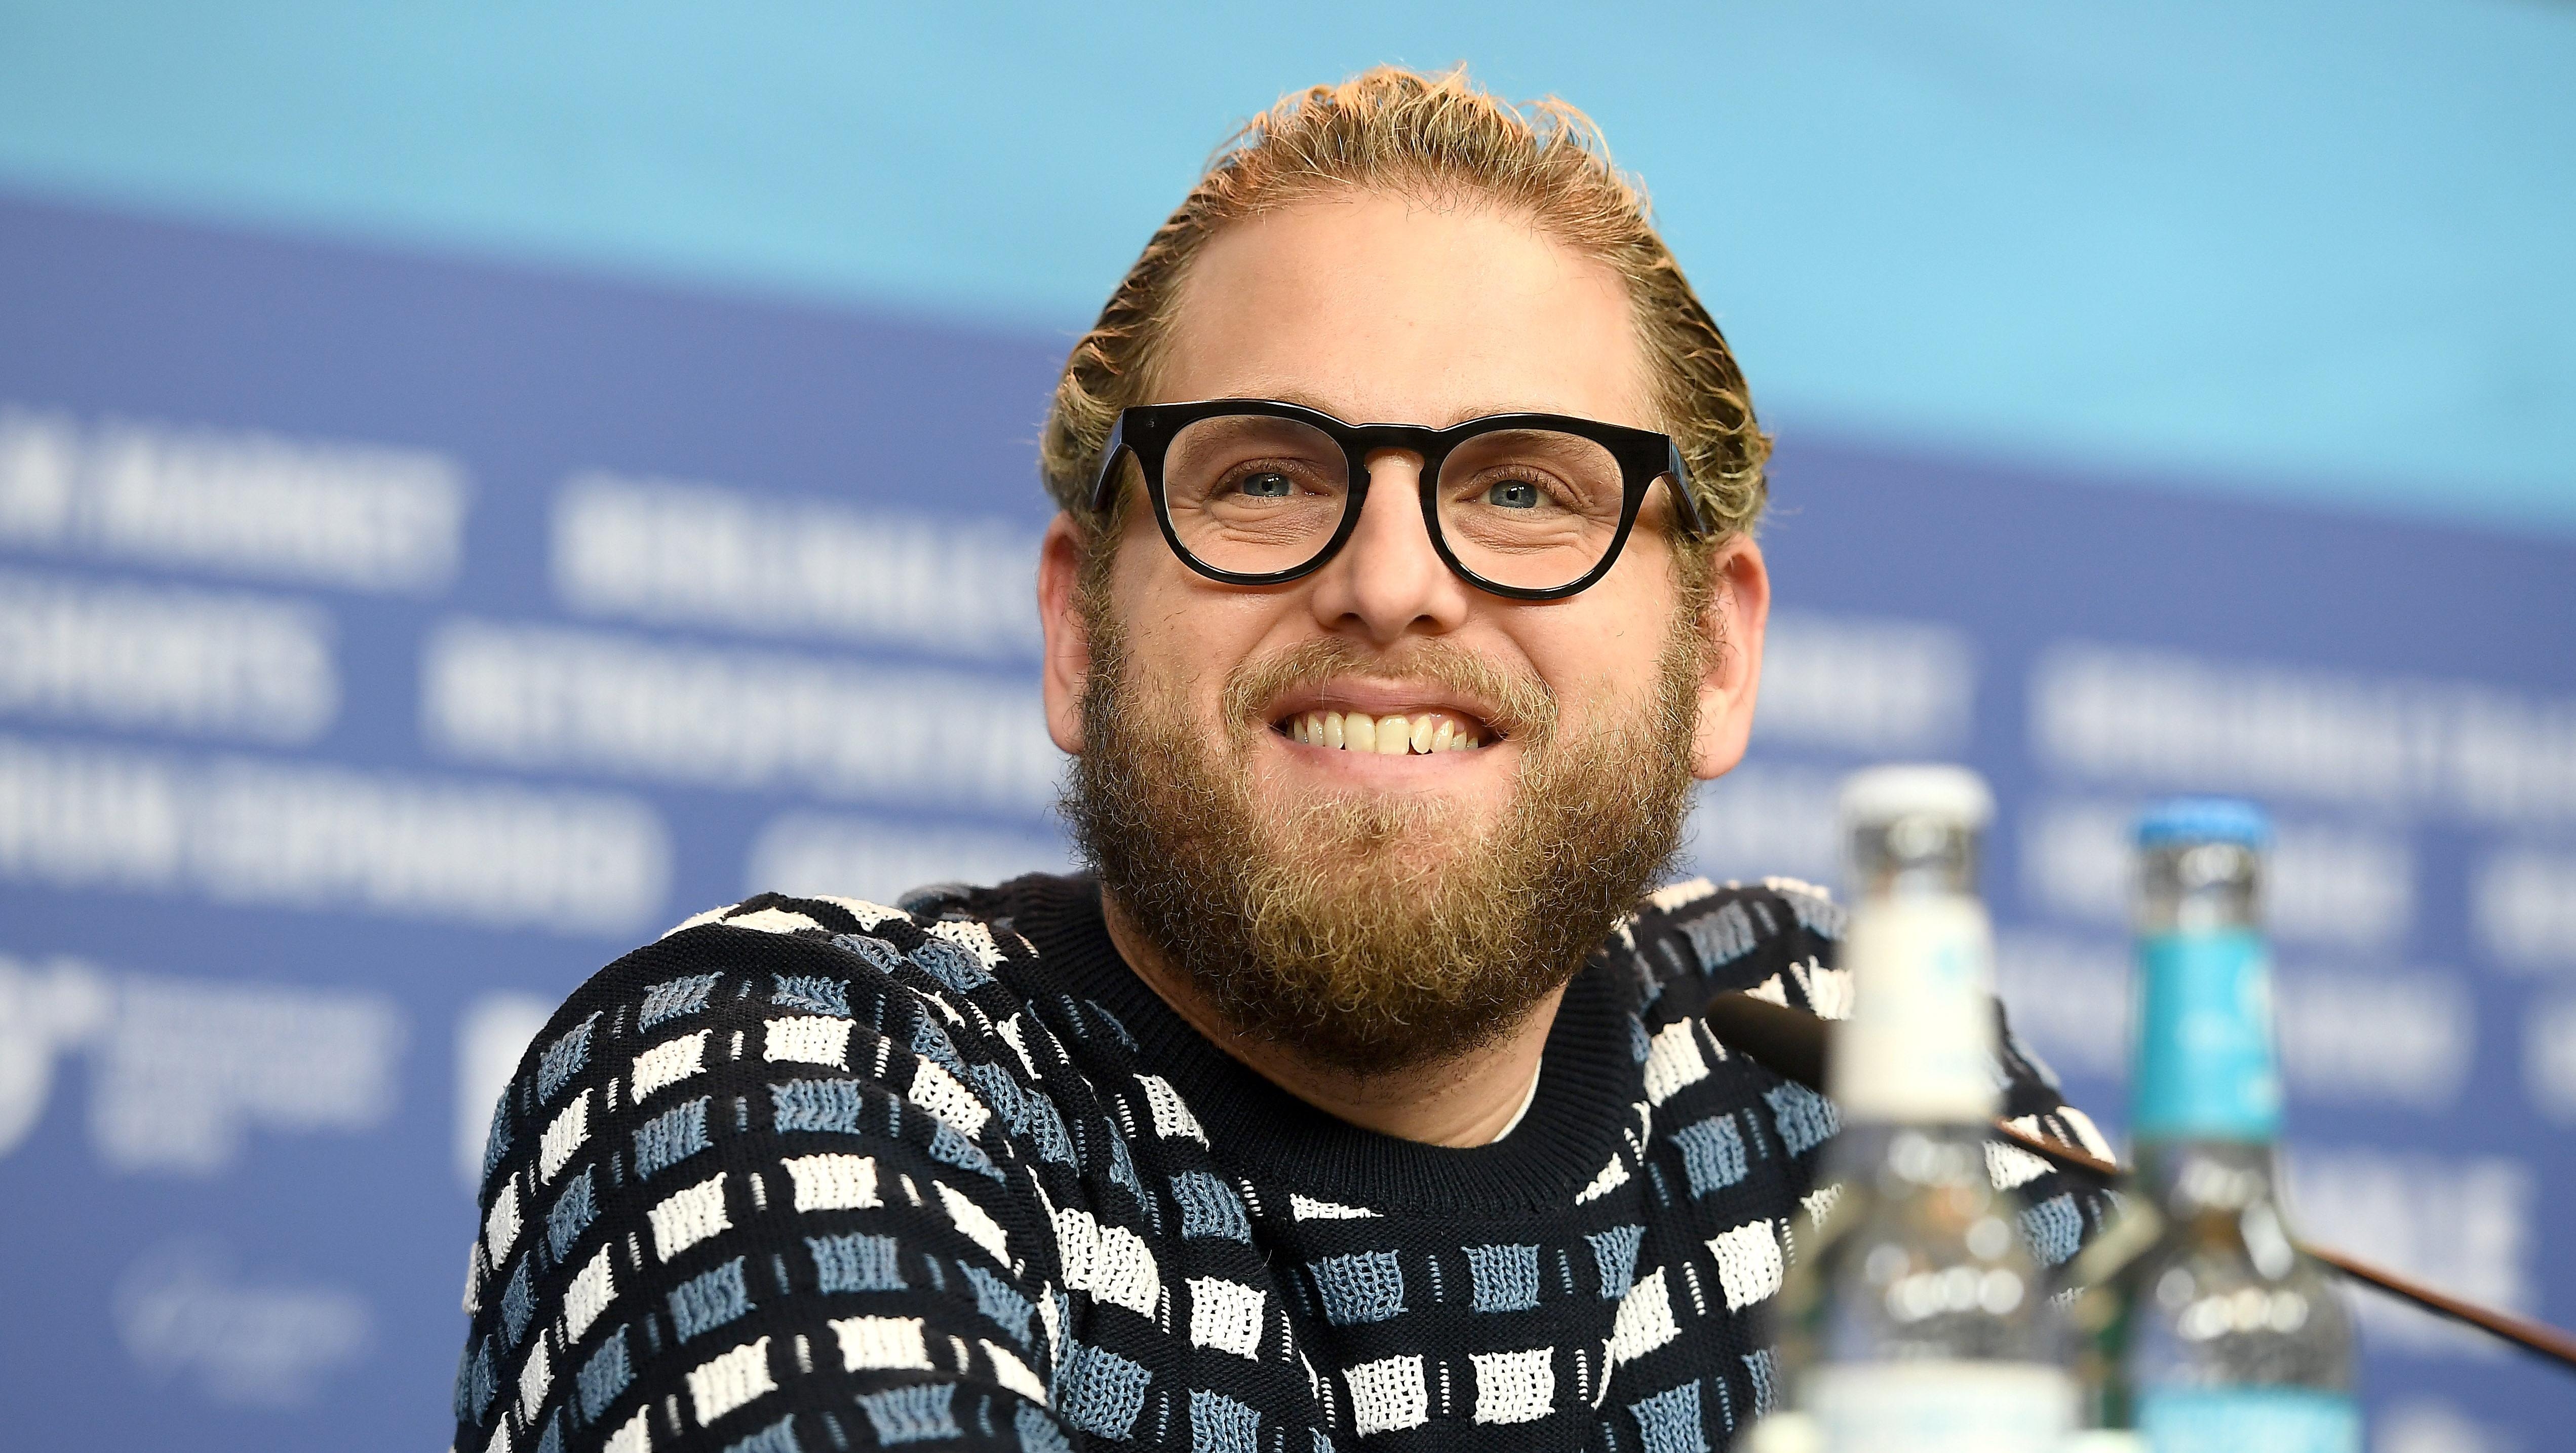 Jonah Hill suits up to play Chicago mob liaison and Hollywood fixer Sidney Korshak